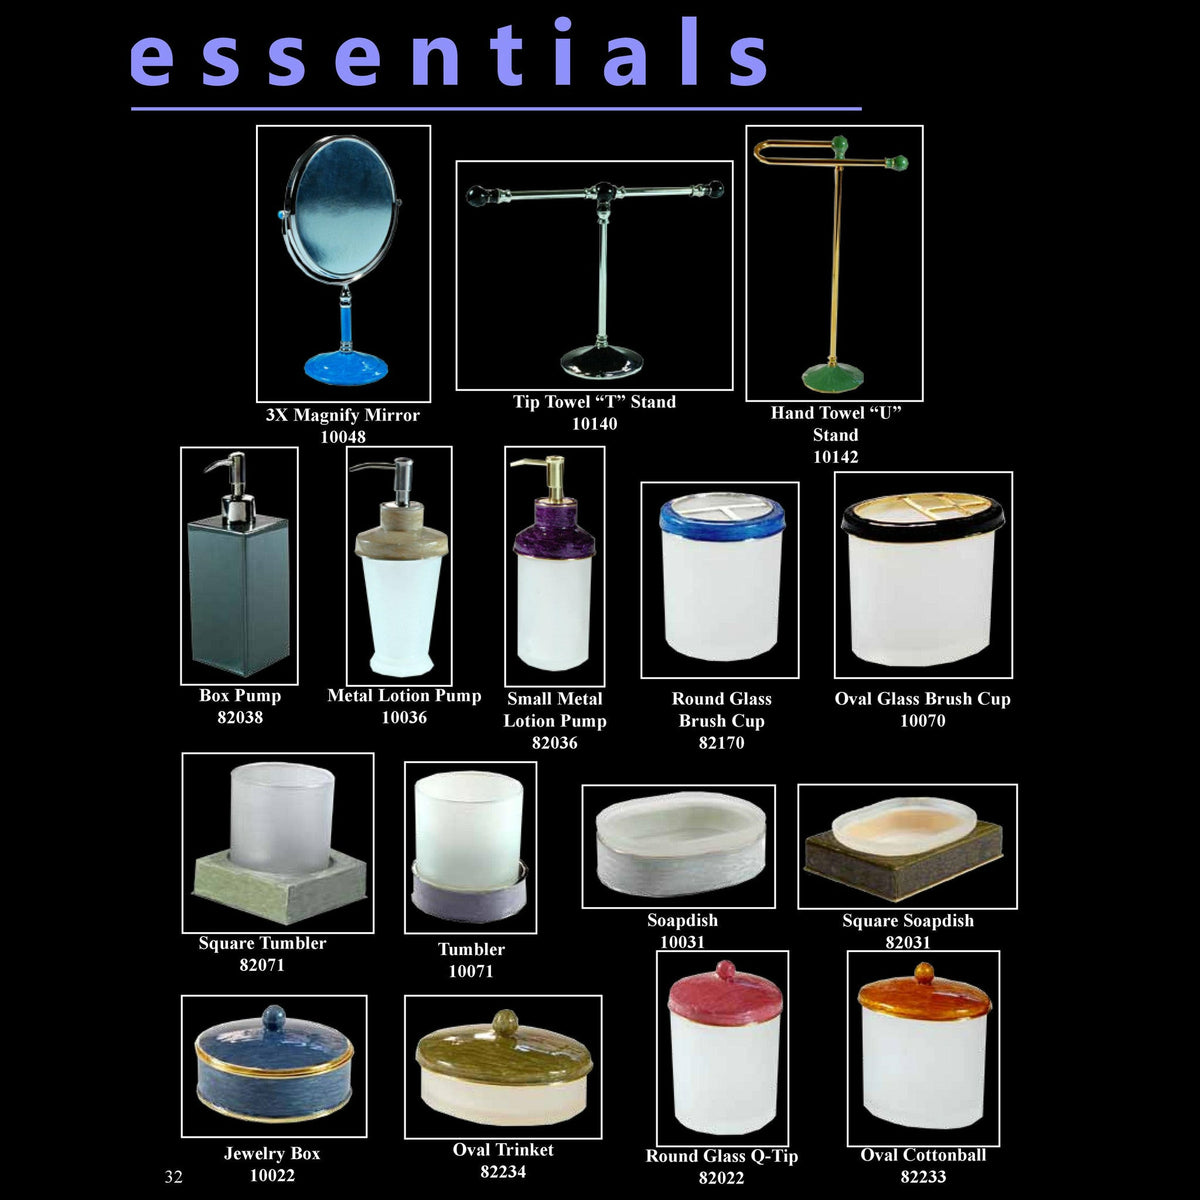 Mike and Ally Essentials Basic Enamel Bath Accessories Catalog1